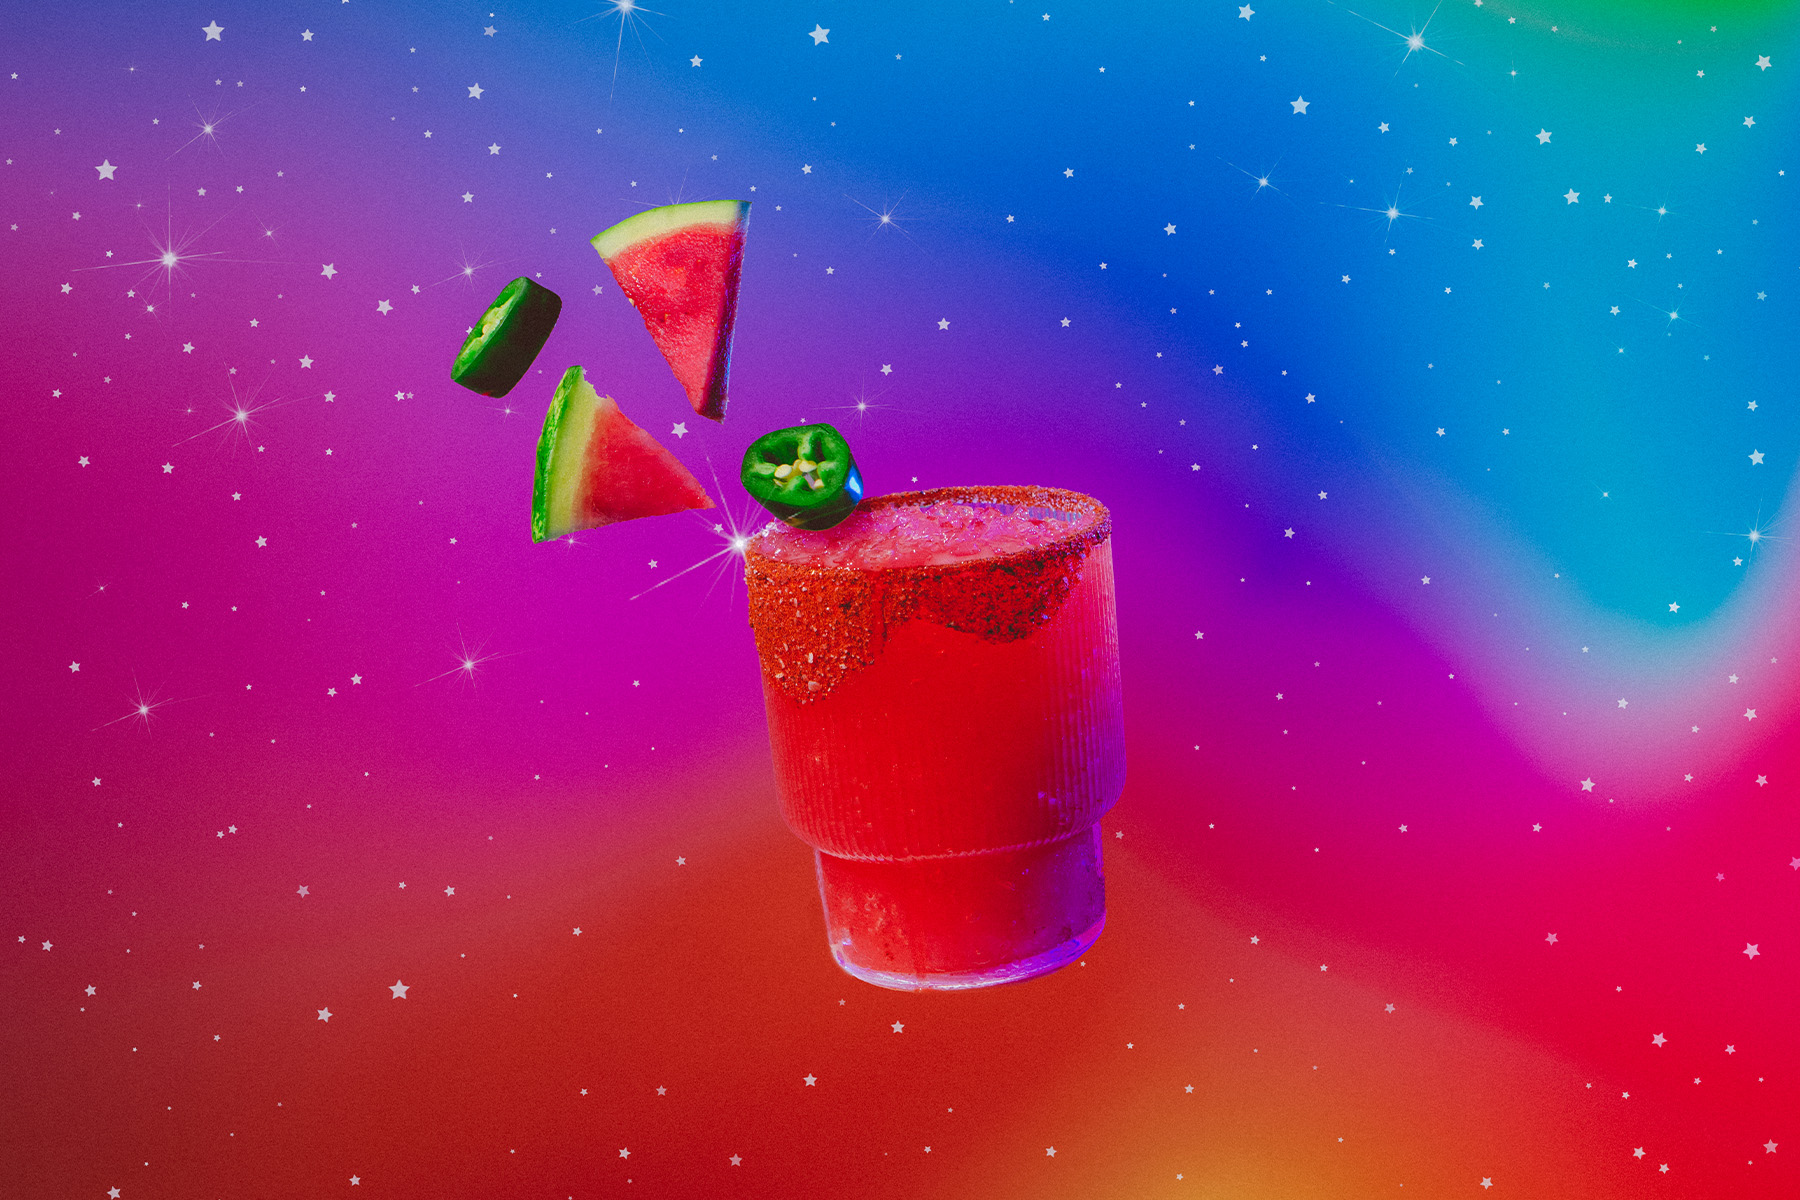 Aries zodiac inspired watermelon and lime cocktail with floating jalapeño slices and watermelon wedges in cosmic surroundings